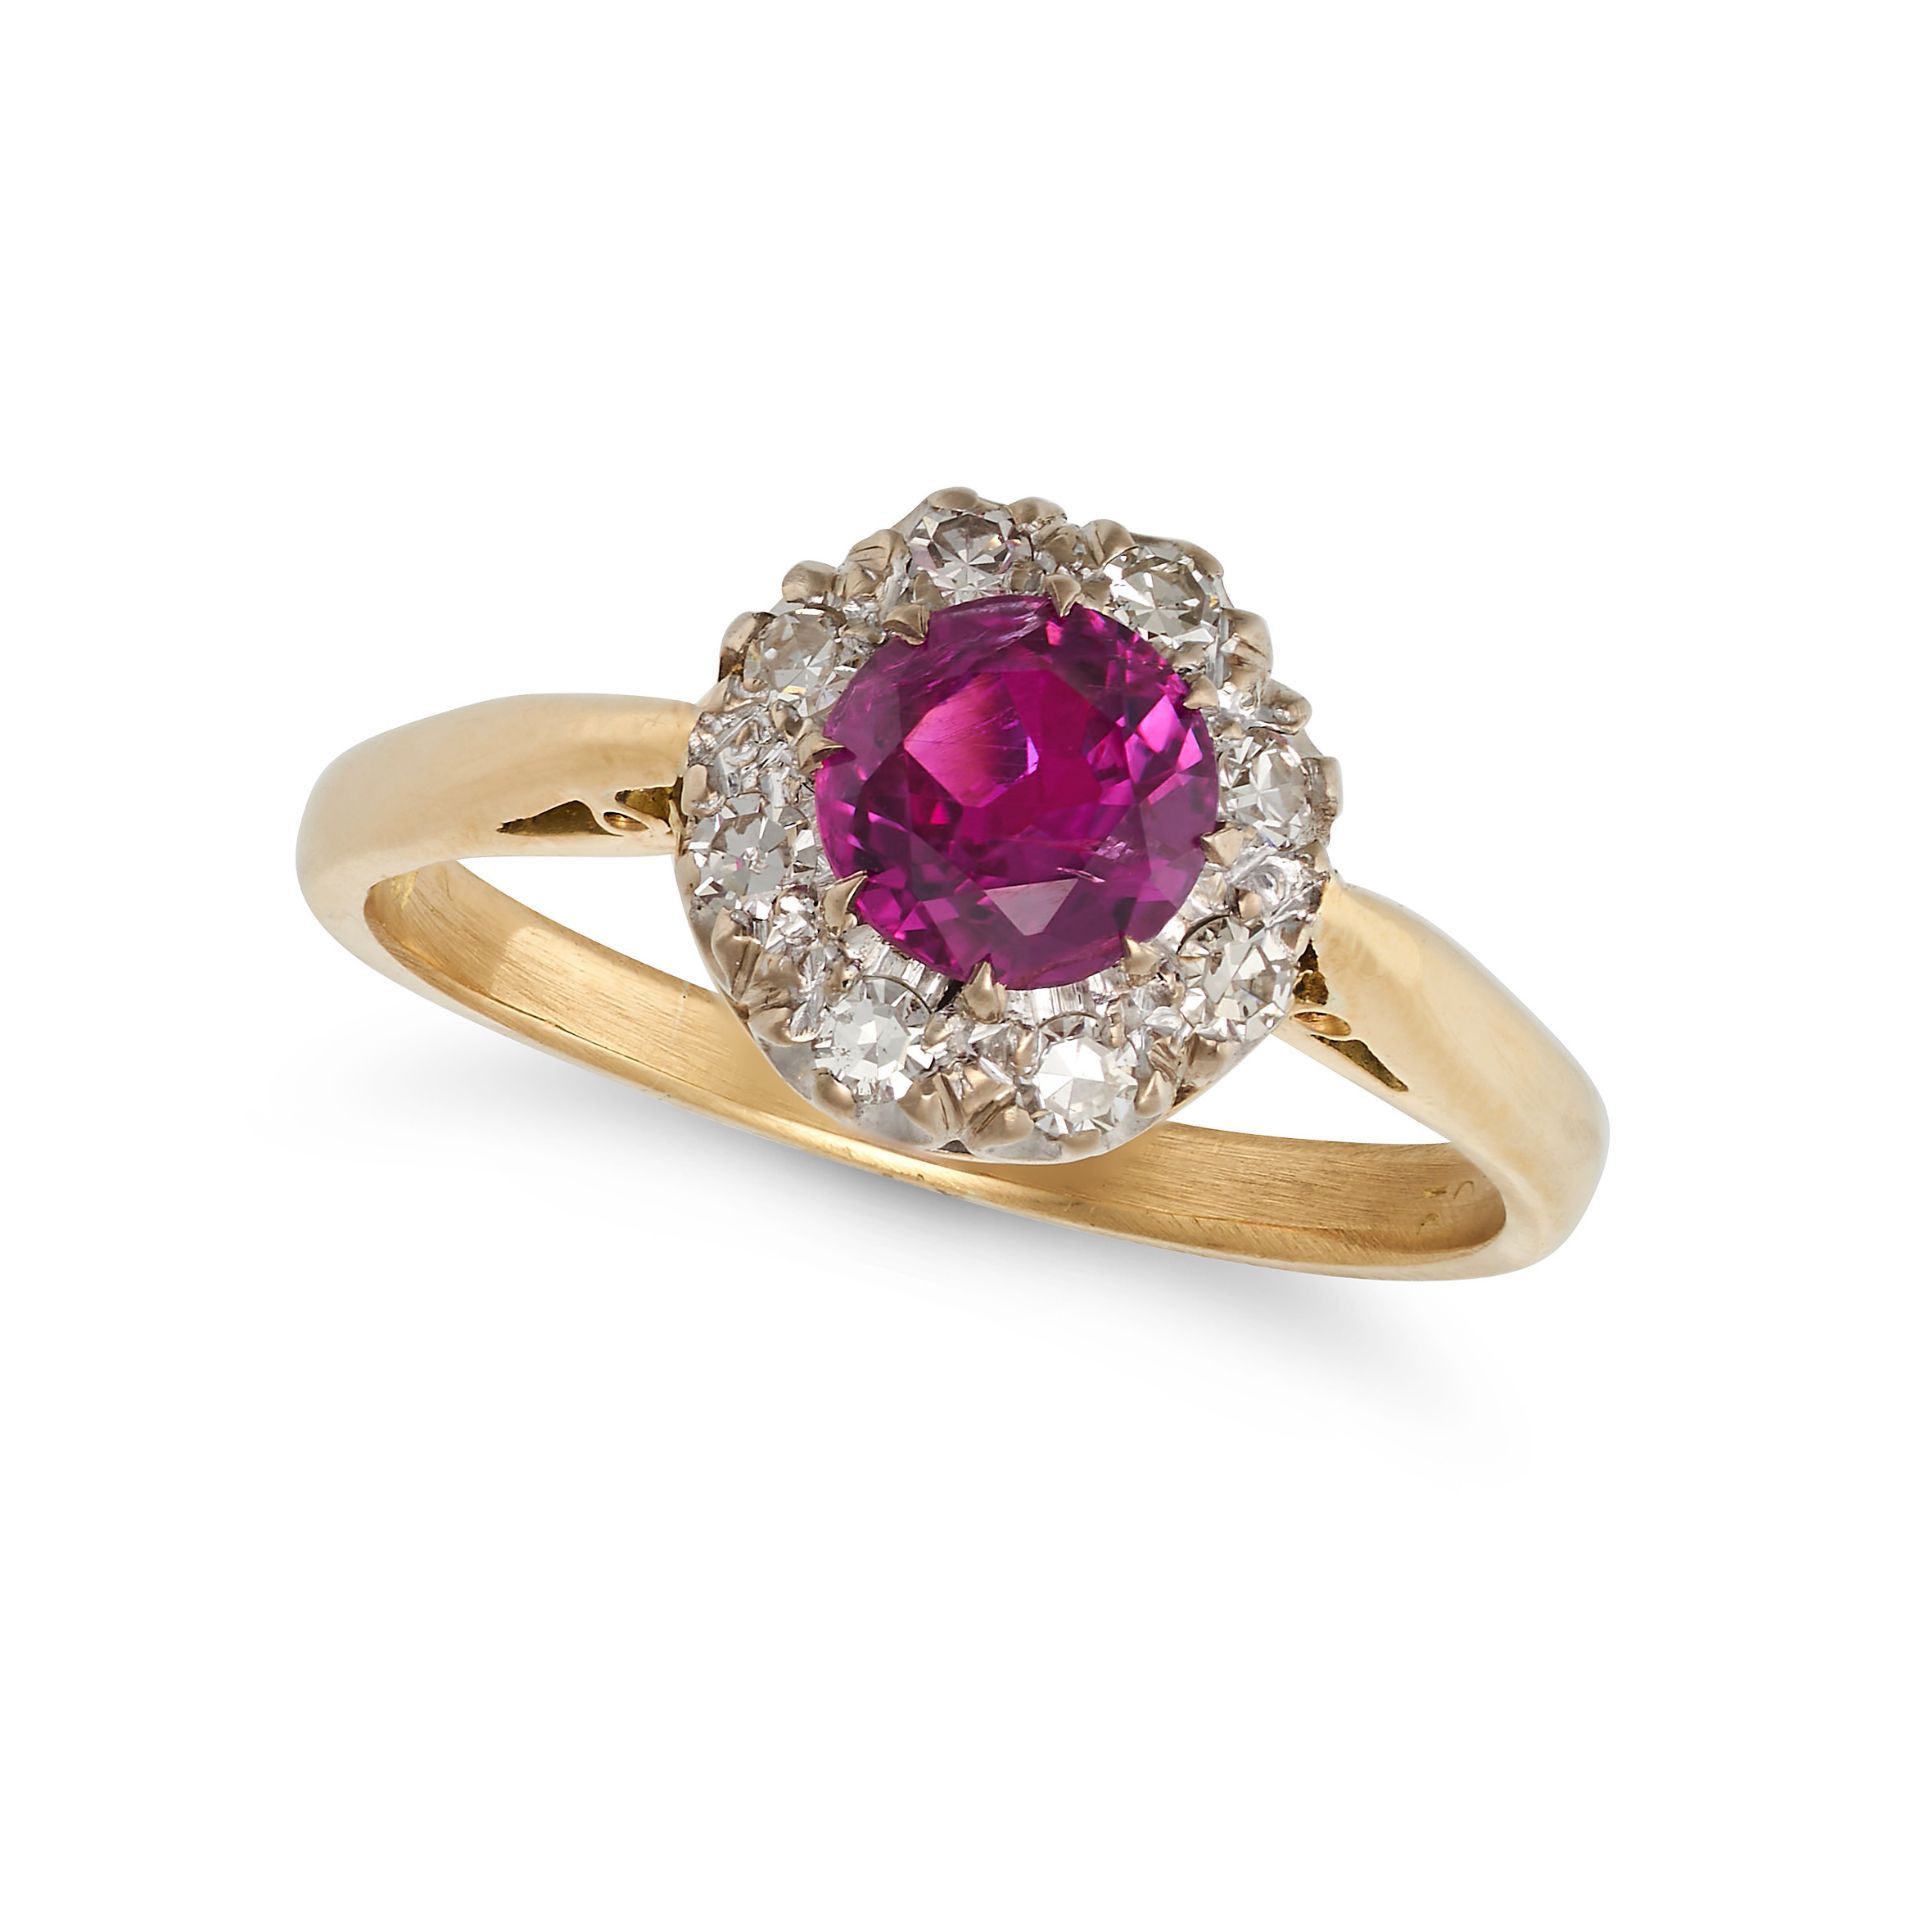 A RUBY AND DIAMOND CLUSTER RING in 18ct yellow gold and platinum, set with a round cut ruby of ap...